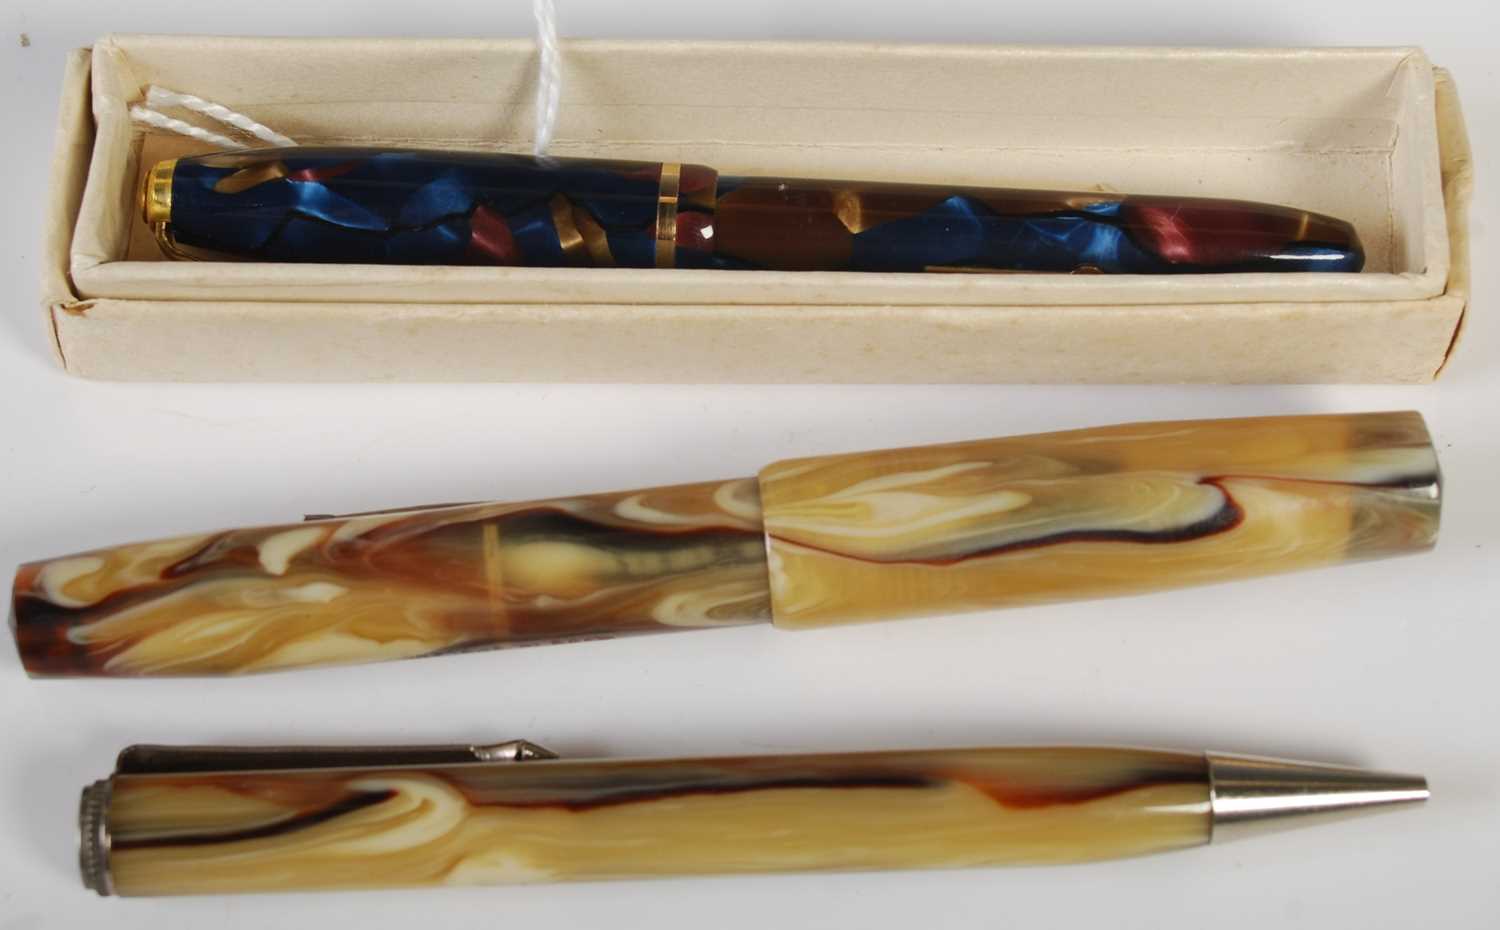 A vintage Conway Stewart 'Dinkie 550' fountain pen, with 14CT gold nib in purple, blue and brown